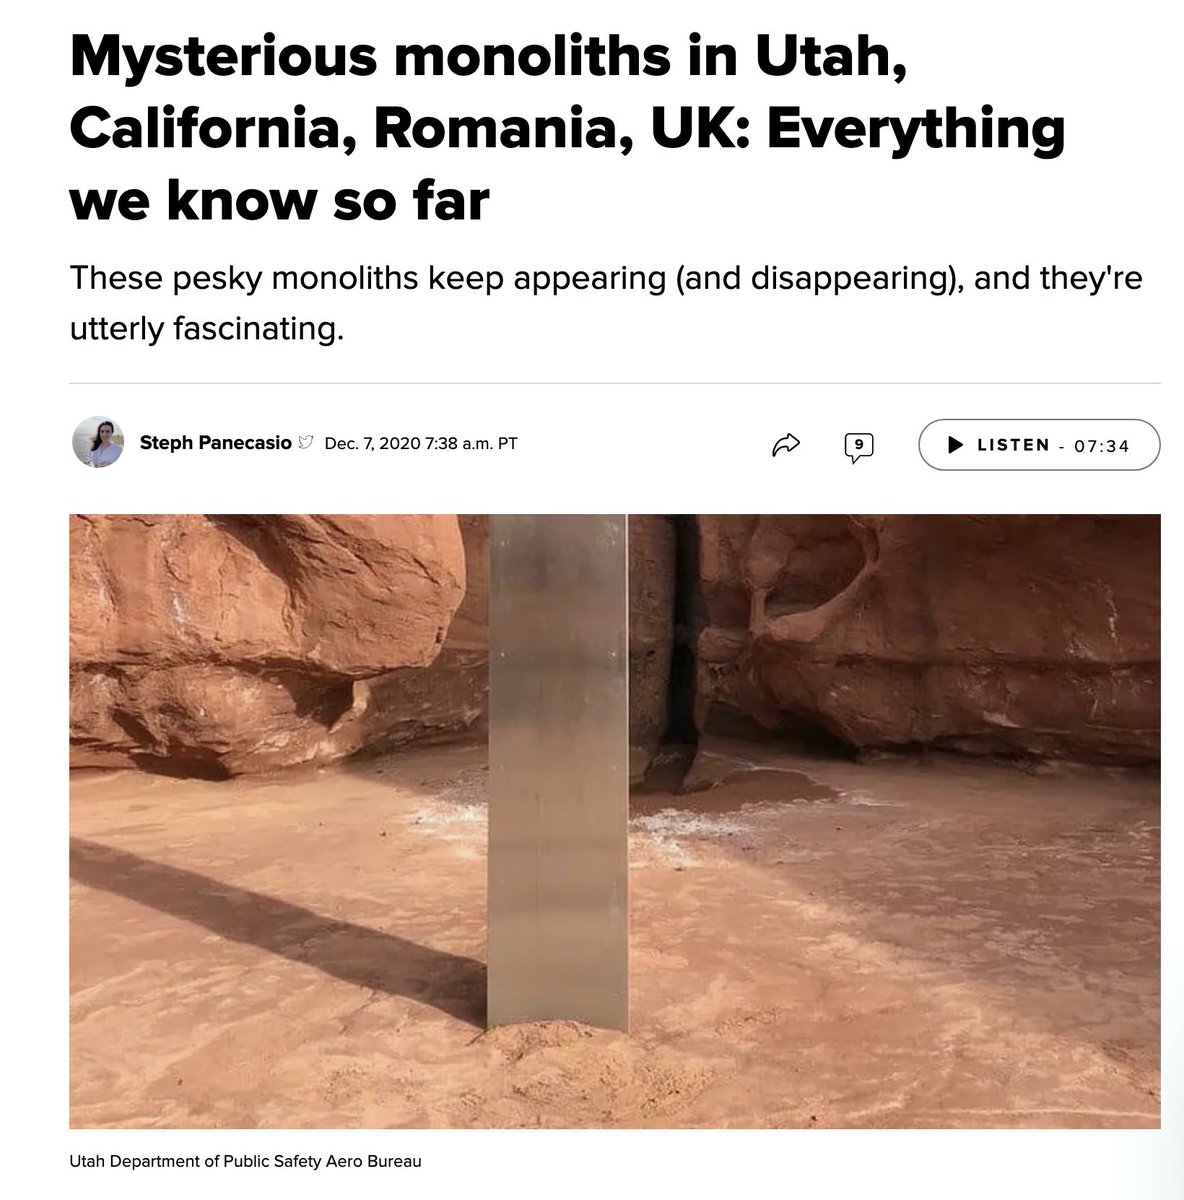 We’ve seen lots of stories of "monoliths" turning up in recent days. These really are not really "-liths" (you know, made of stone), but have got me thinking about far more fascinating ones in the Andes, yet rarely get any press. So a long-ish thread into “monolith worlds” (1/25)